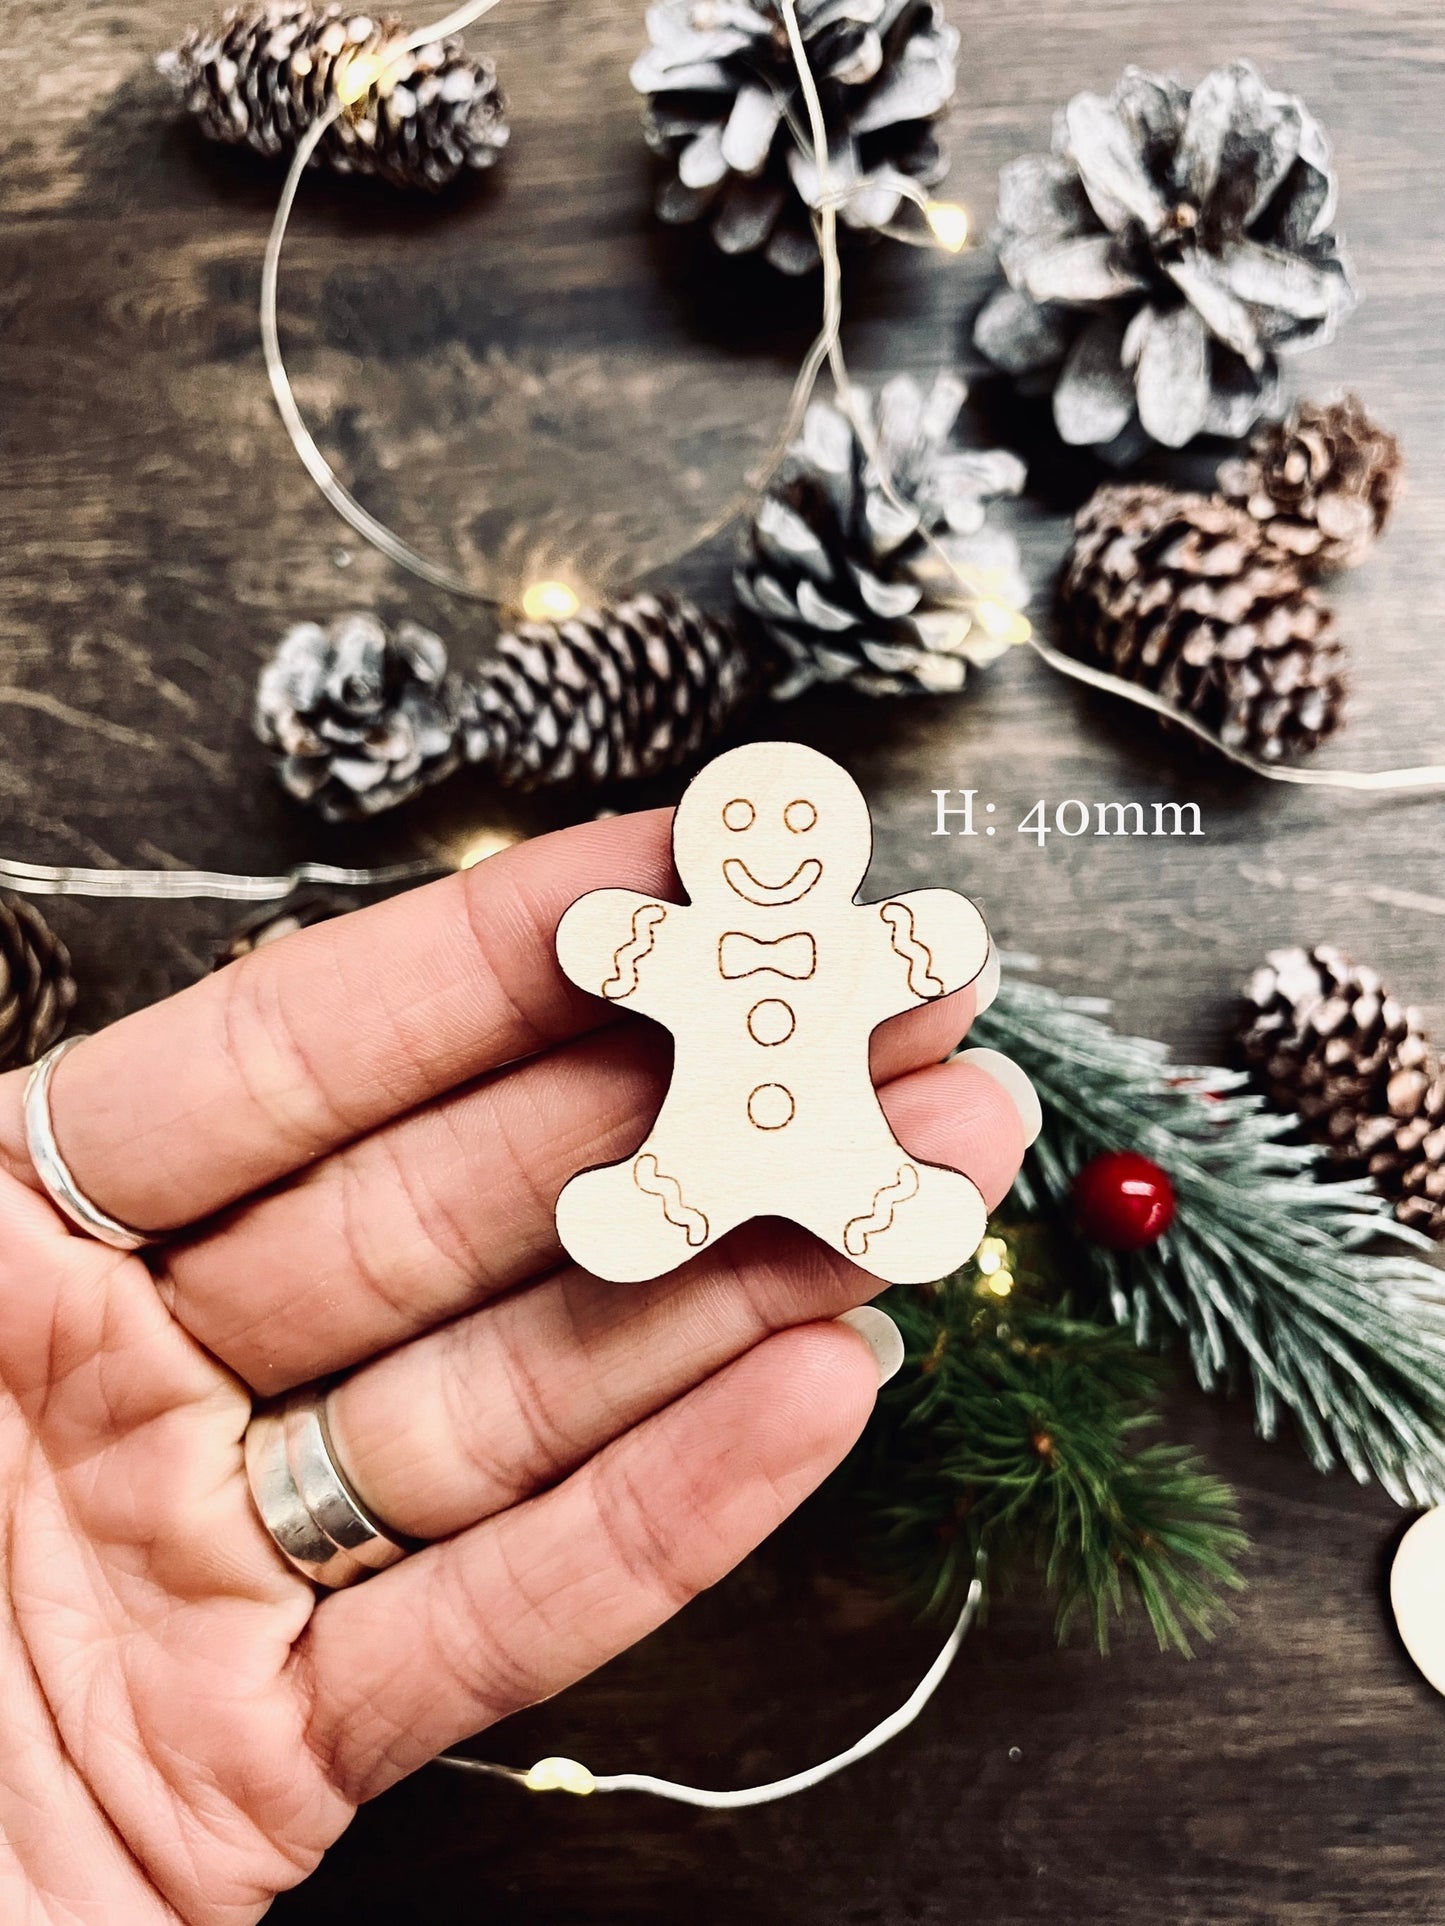 10x Wooden Gingerbread Man Nordic Christmas Crafts Decorations | Christmas Decor | Laser Cut Plywood Craft Shapes